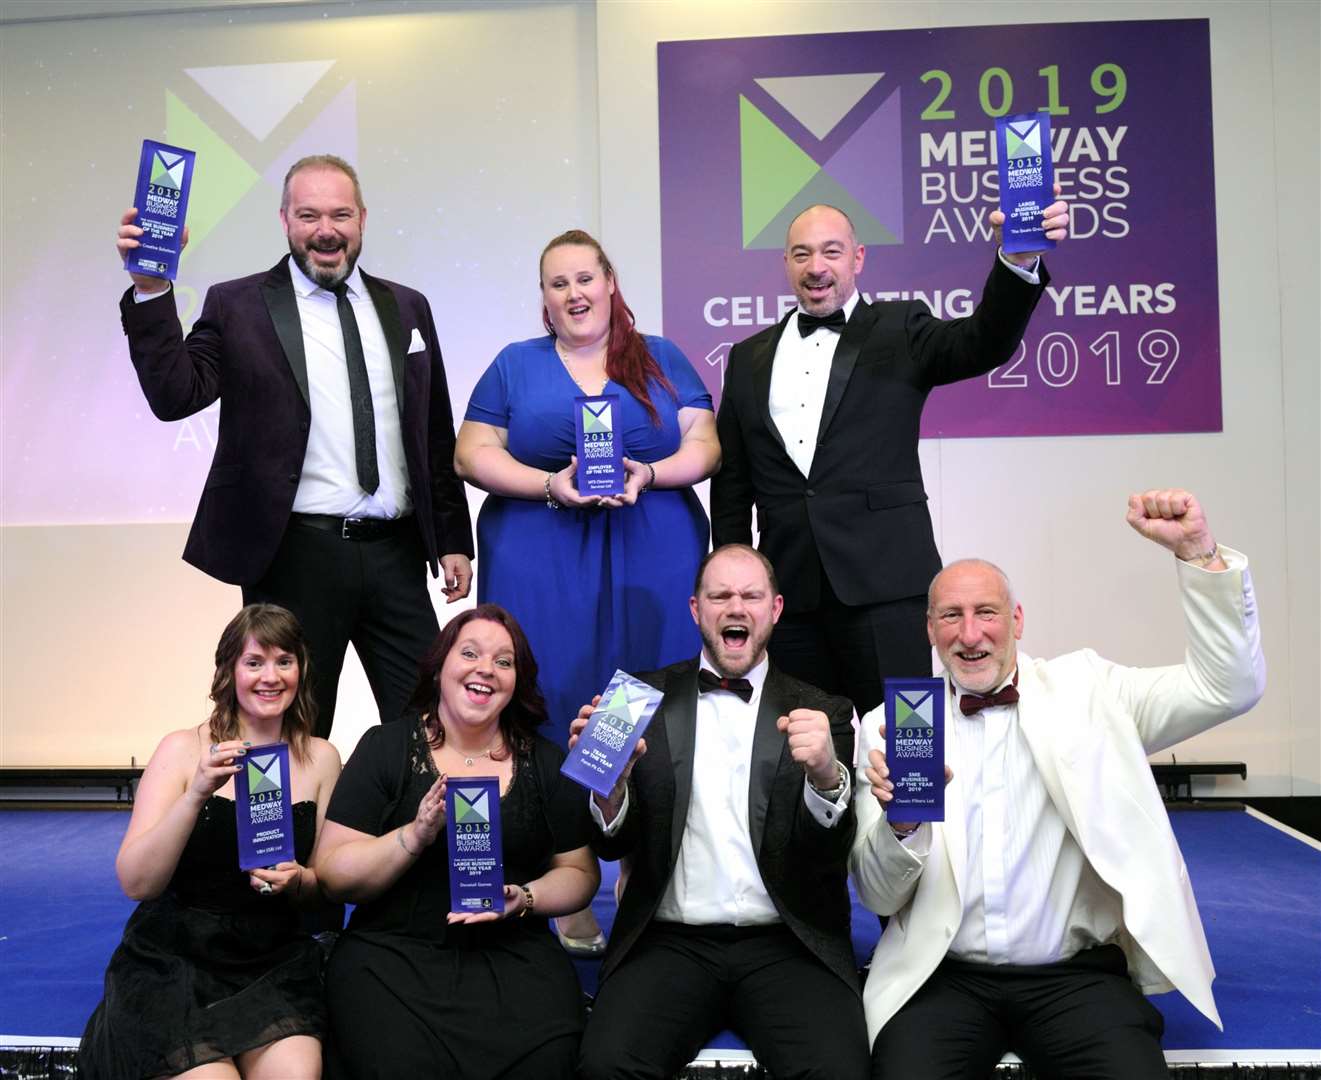 Medway Business Awards 2019, held in Priestfield Stadium, Gillingham. Picture: Simon Hildrew.